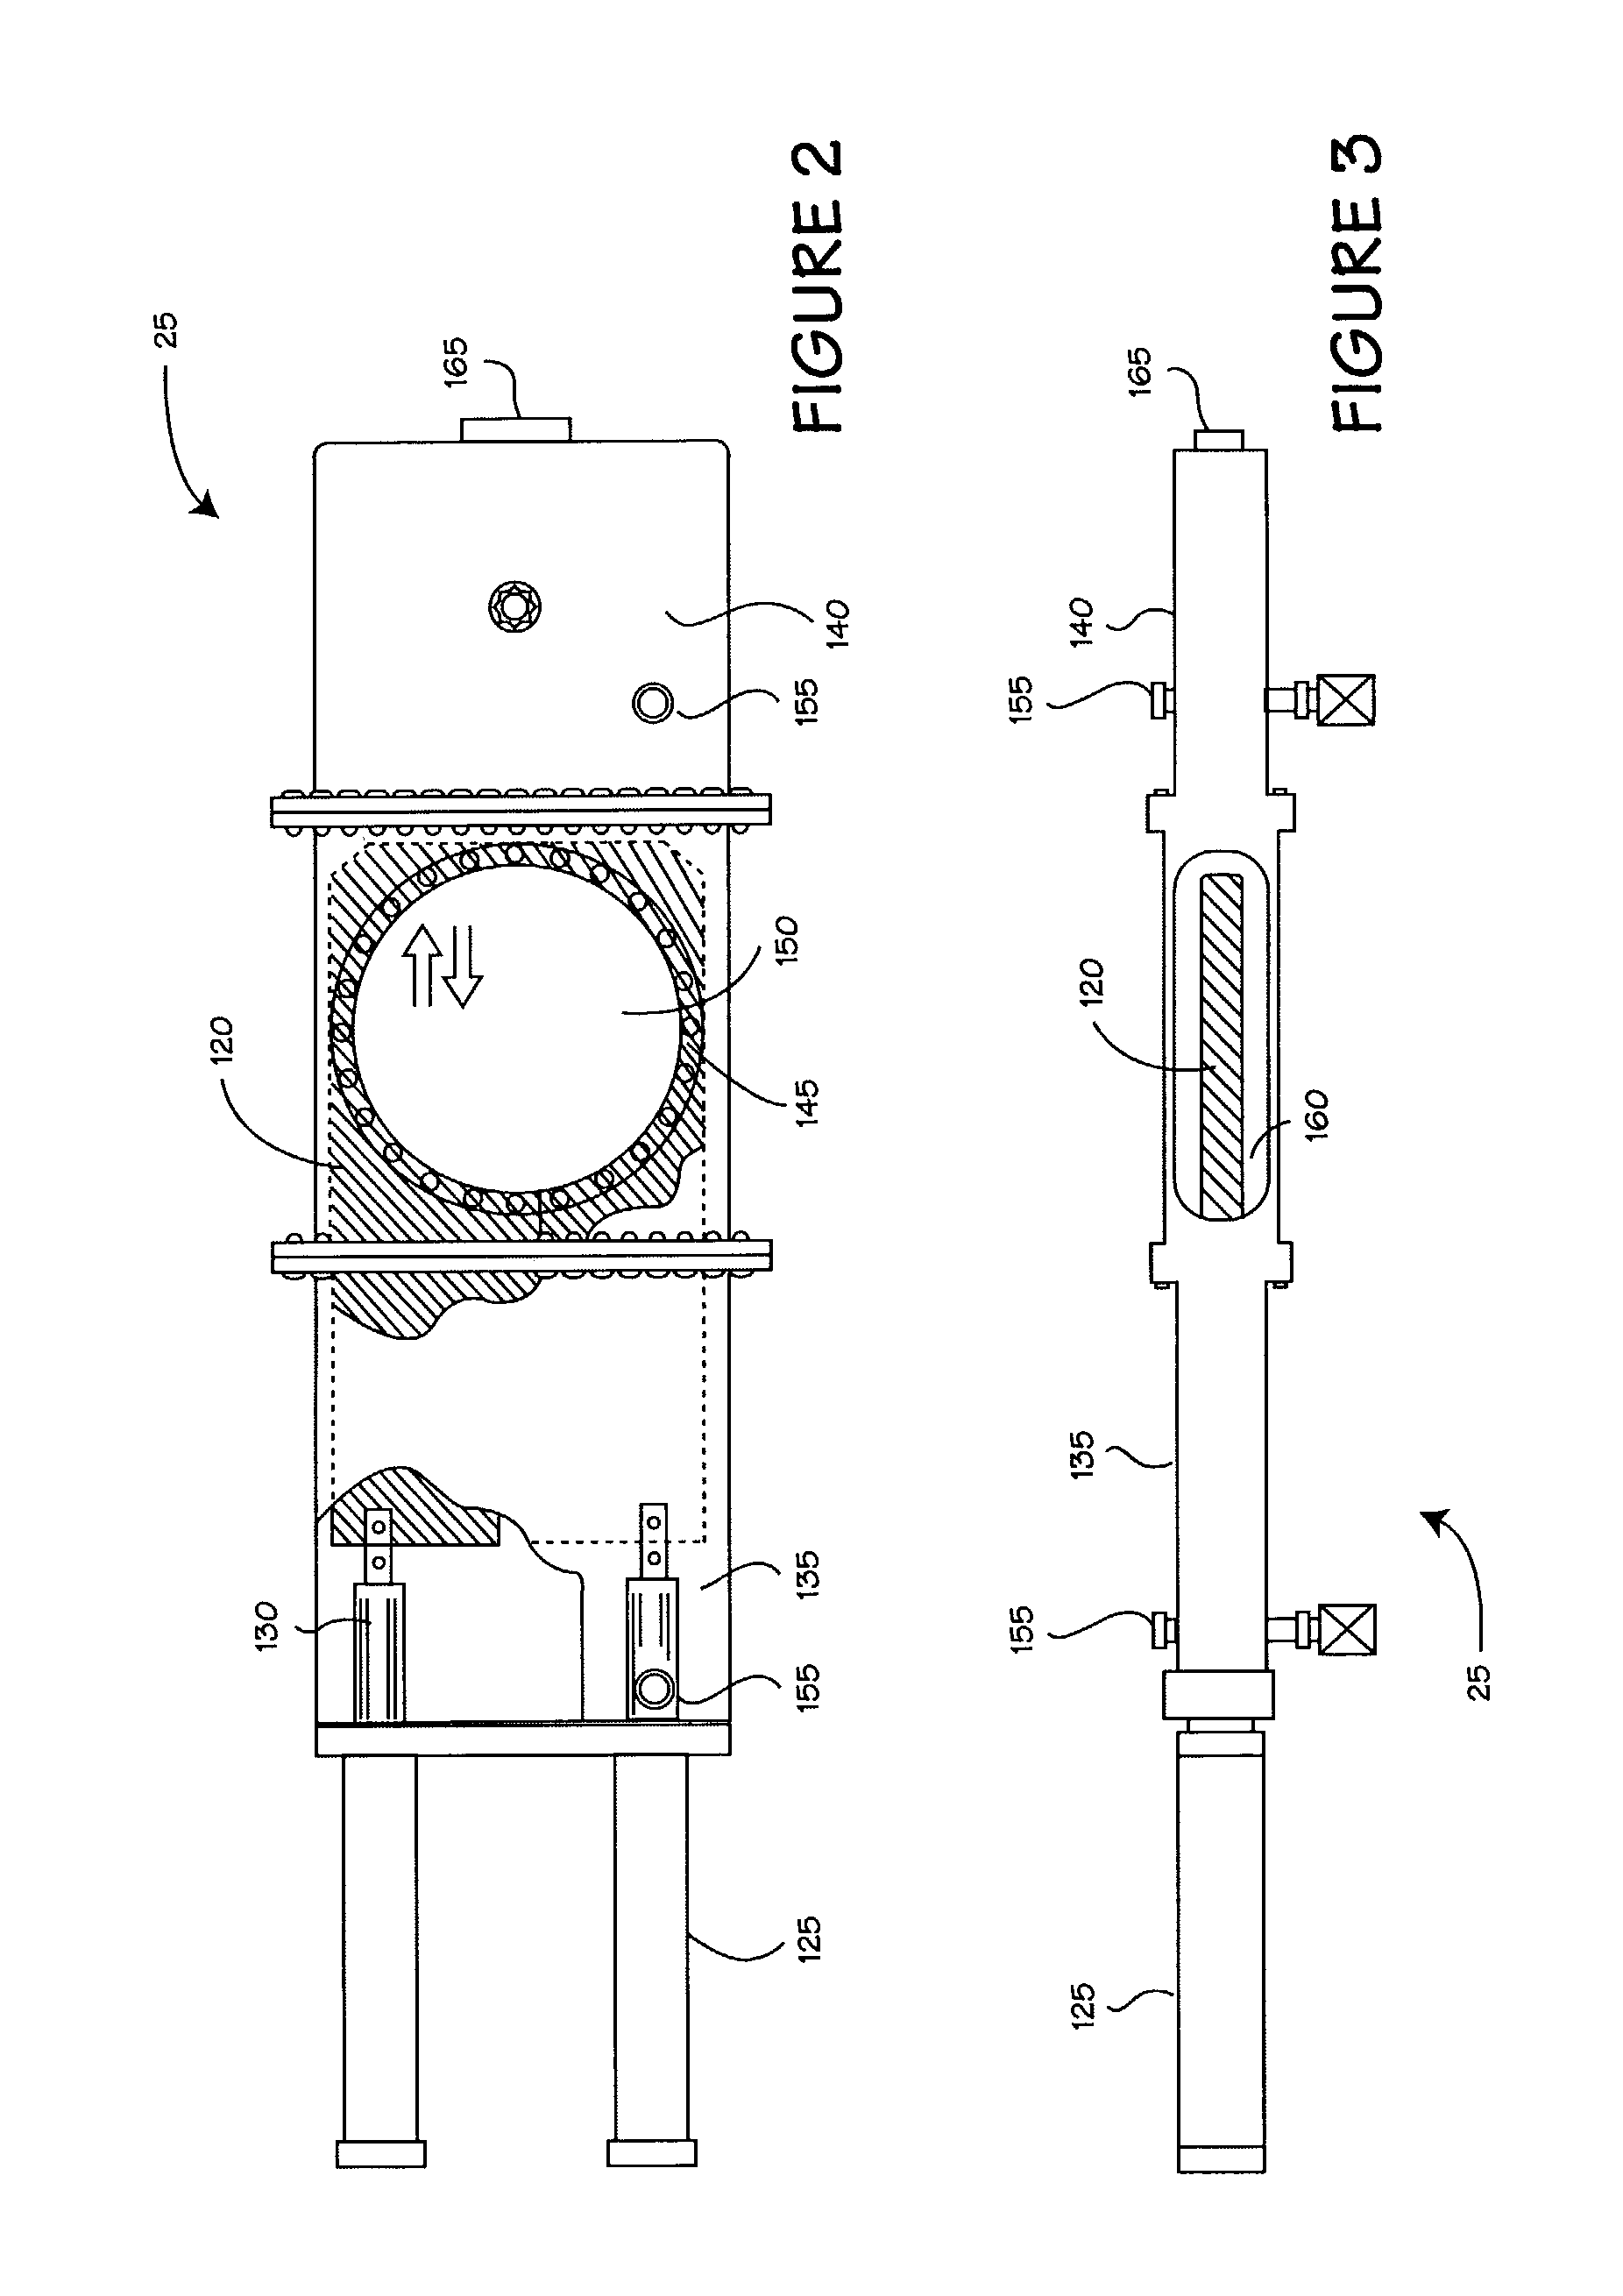 Safe and automatic method for preparation of coke for removal from a coke vessel